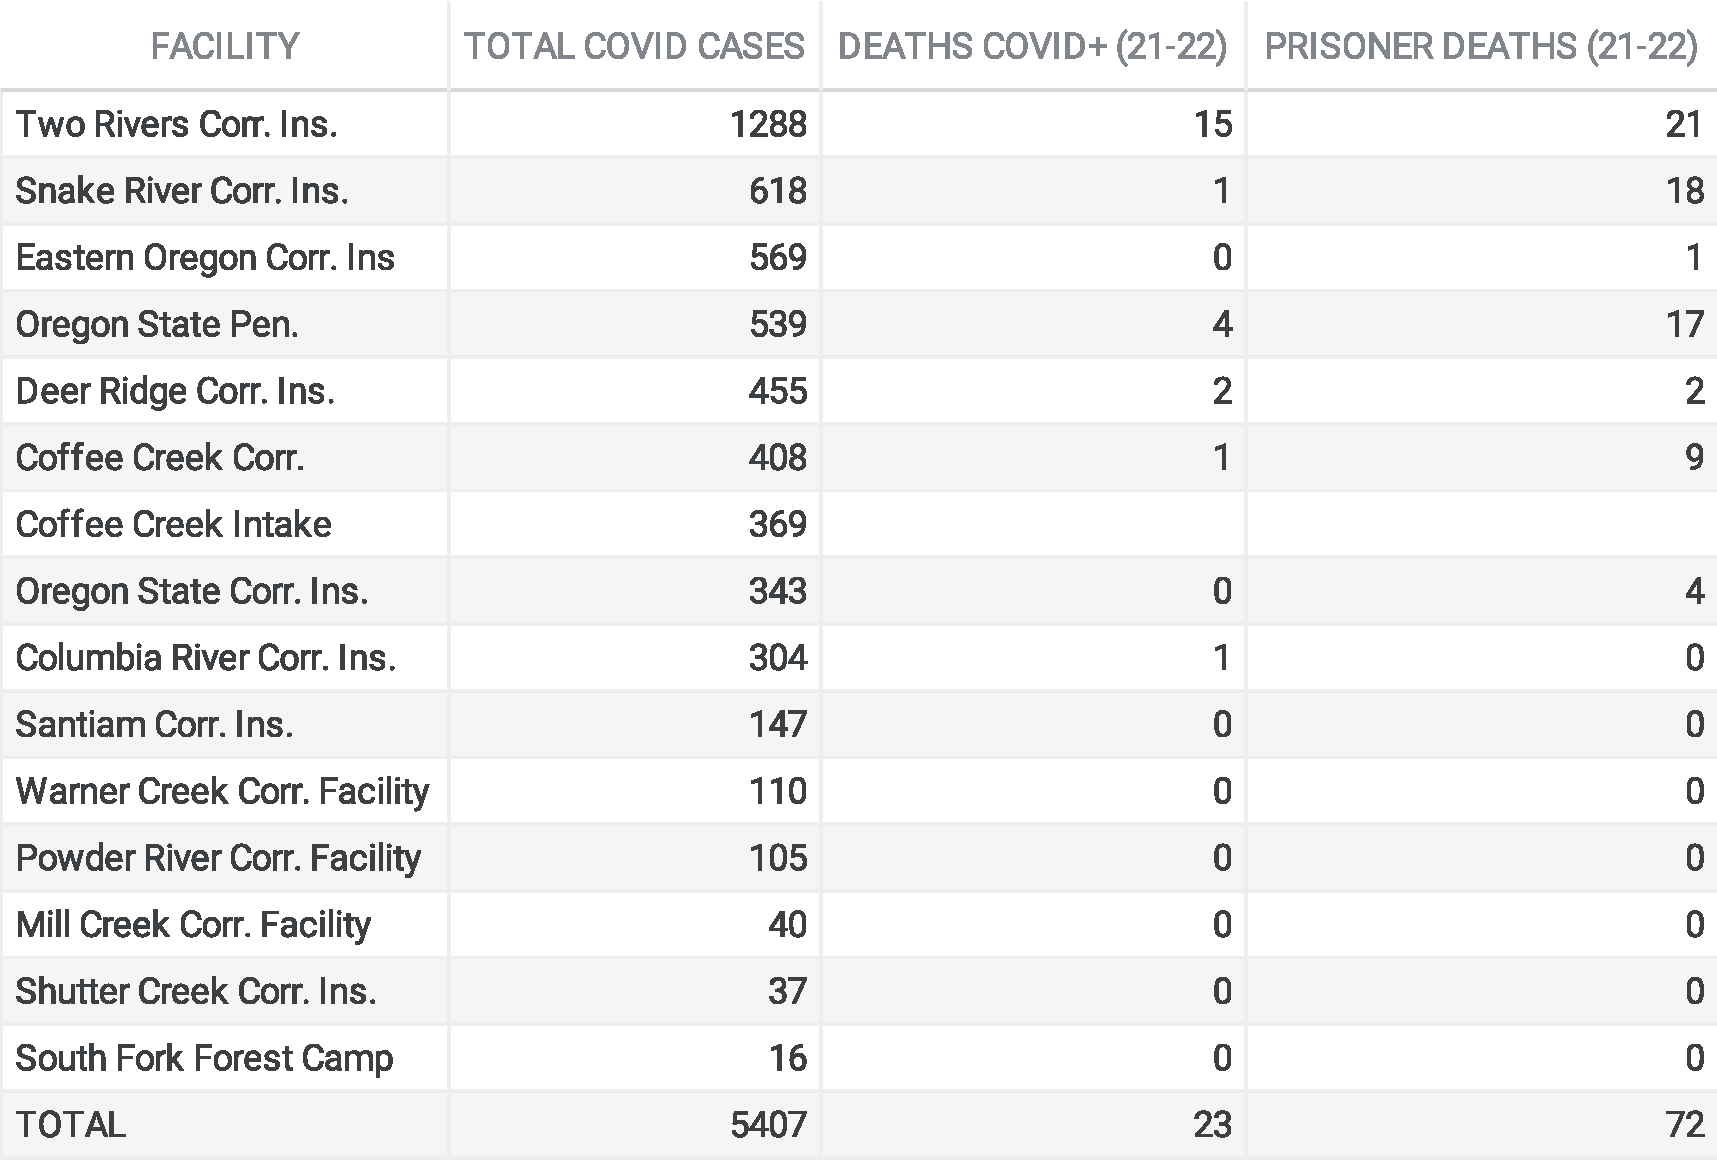 A table shows rows labeled "facility, total covid cases, covid deaths (21-11), and prisoner deaths (21-22)